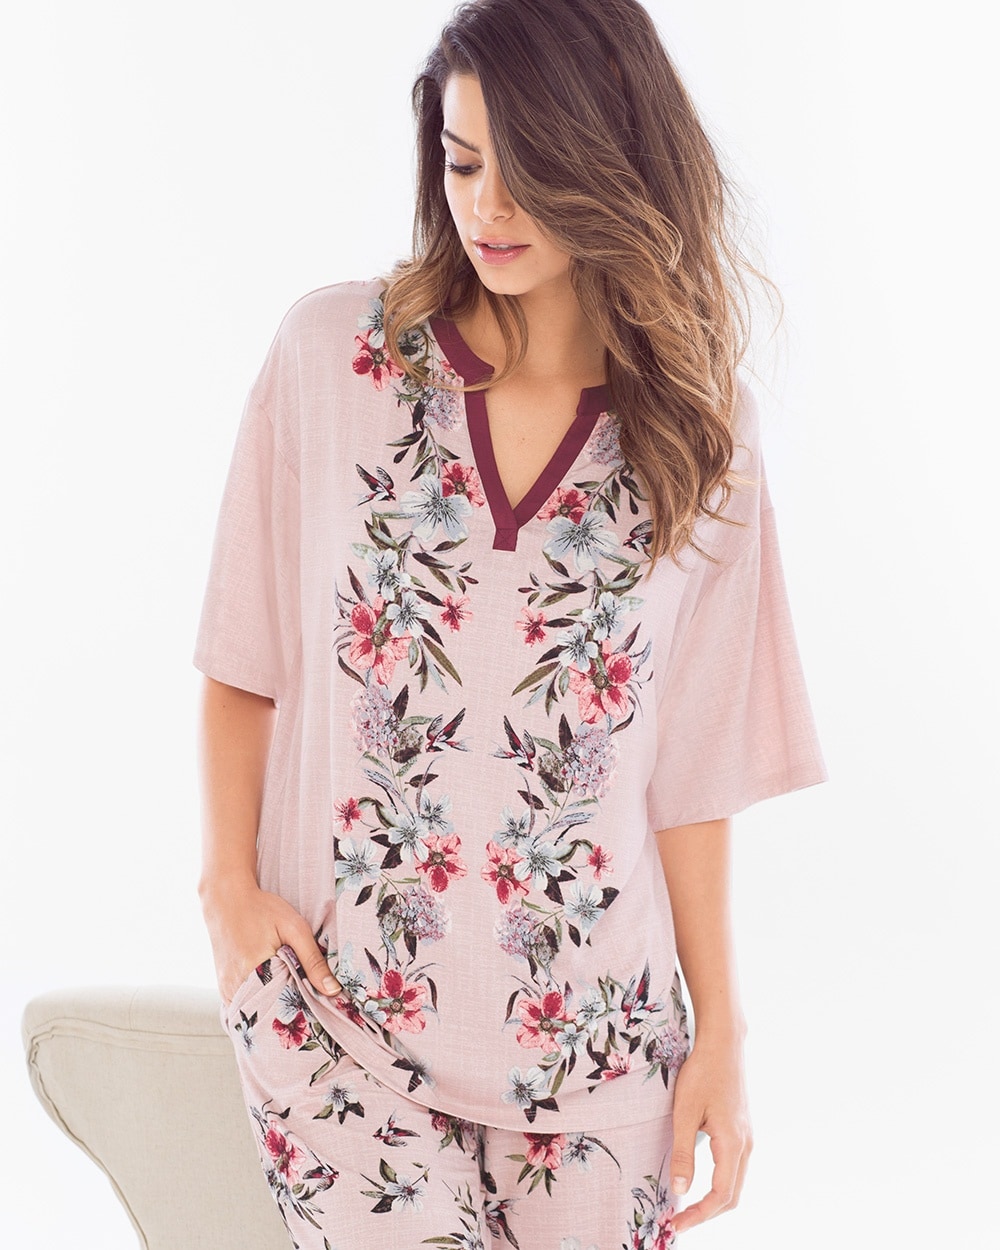 Cool Nights Pop Over Pajama Top Fancy Floral Scarf Pink